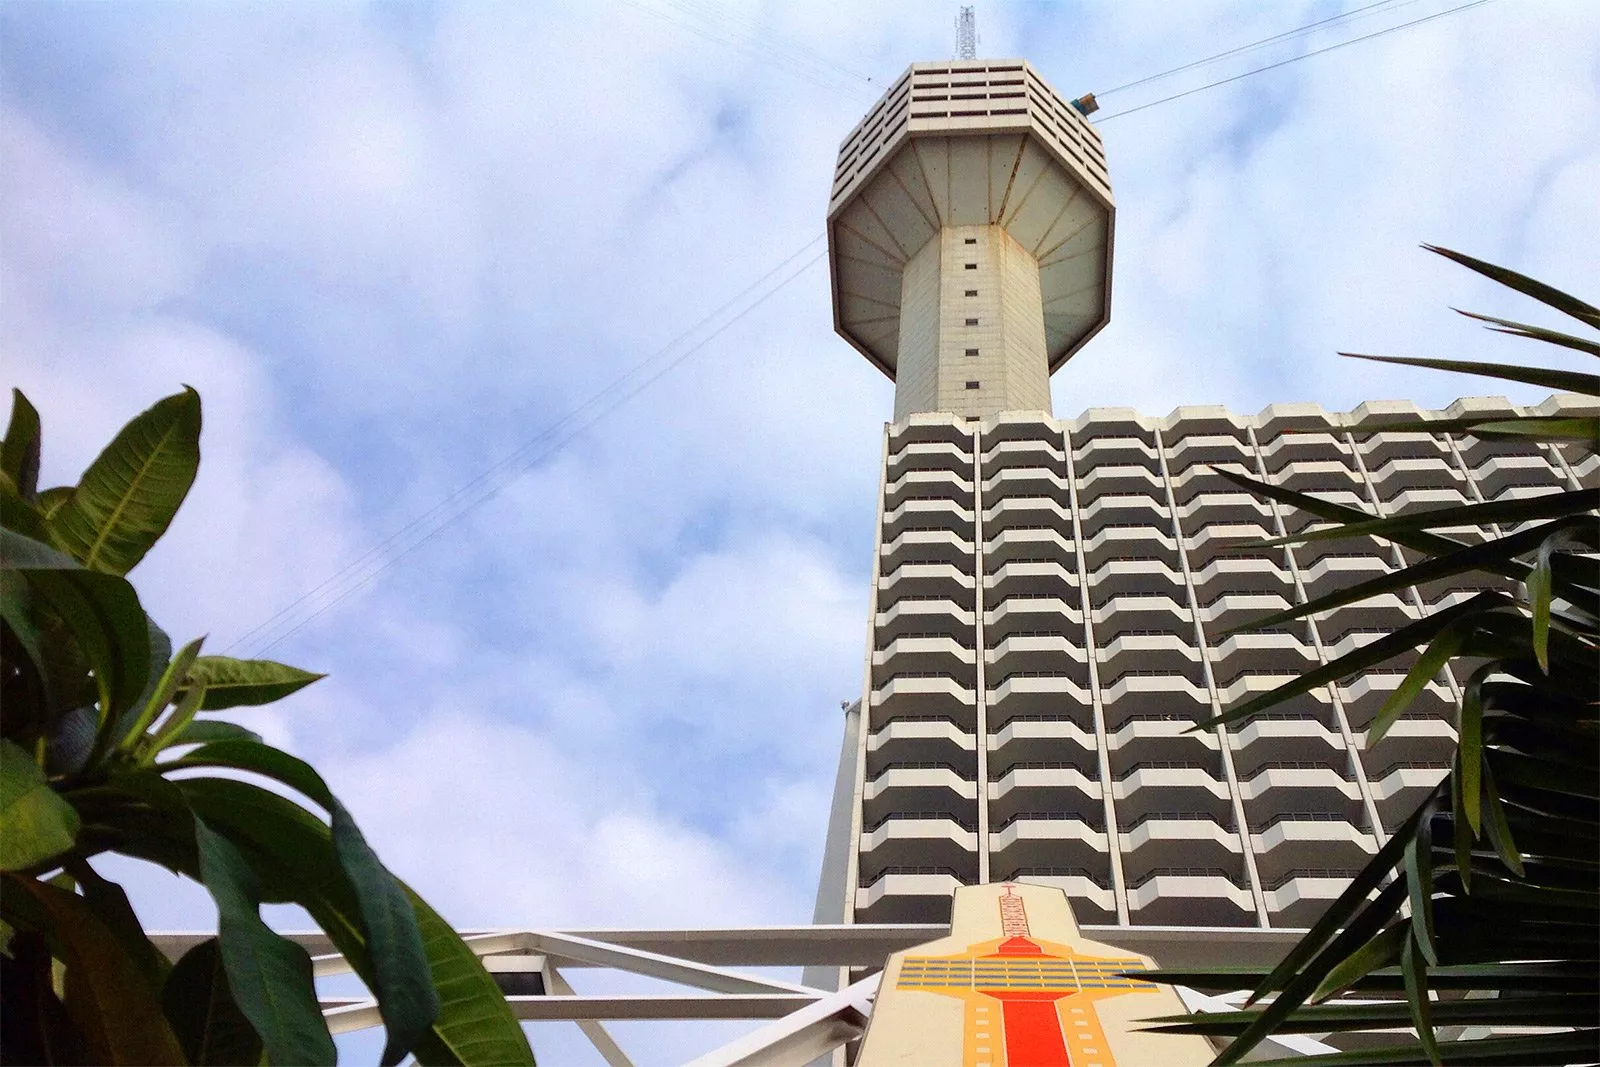 Pattaya Park Tower in Thailand, Central Asia | Observation Decks,Bungee Jumping - Rated 4.4